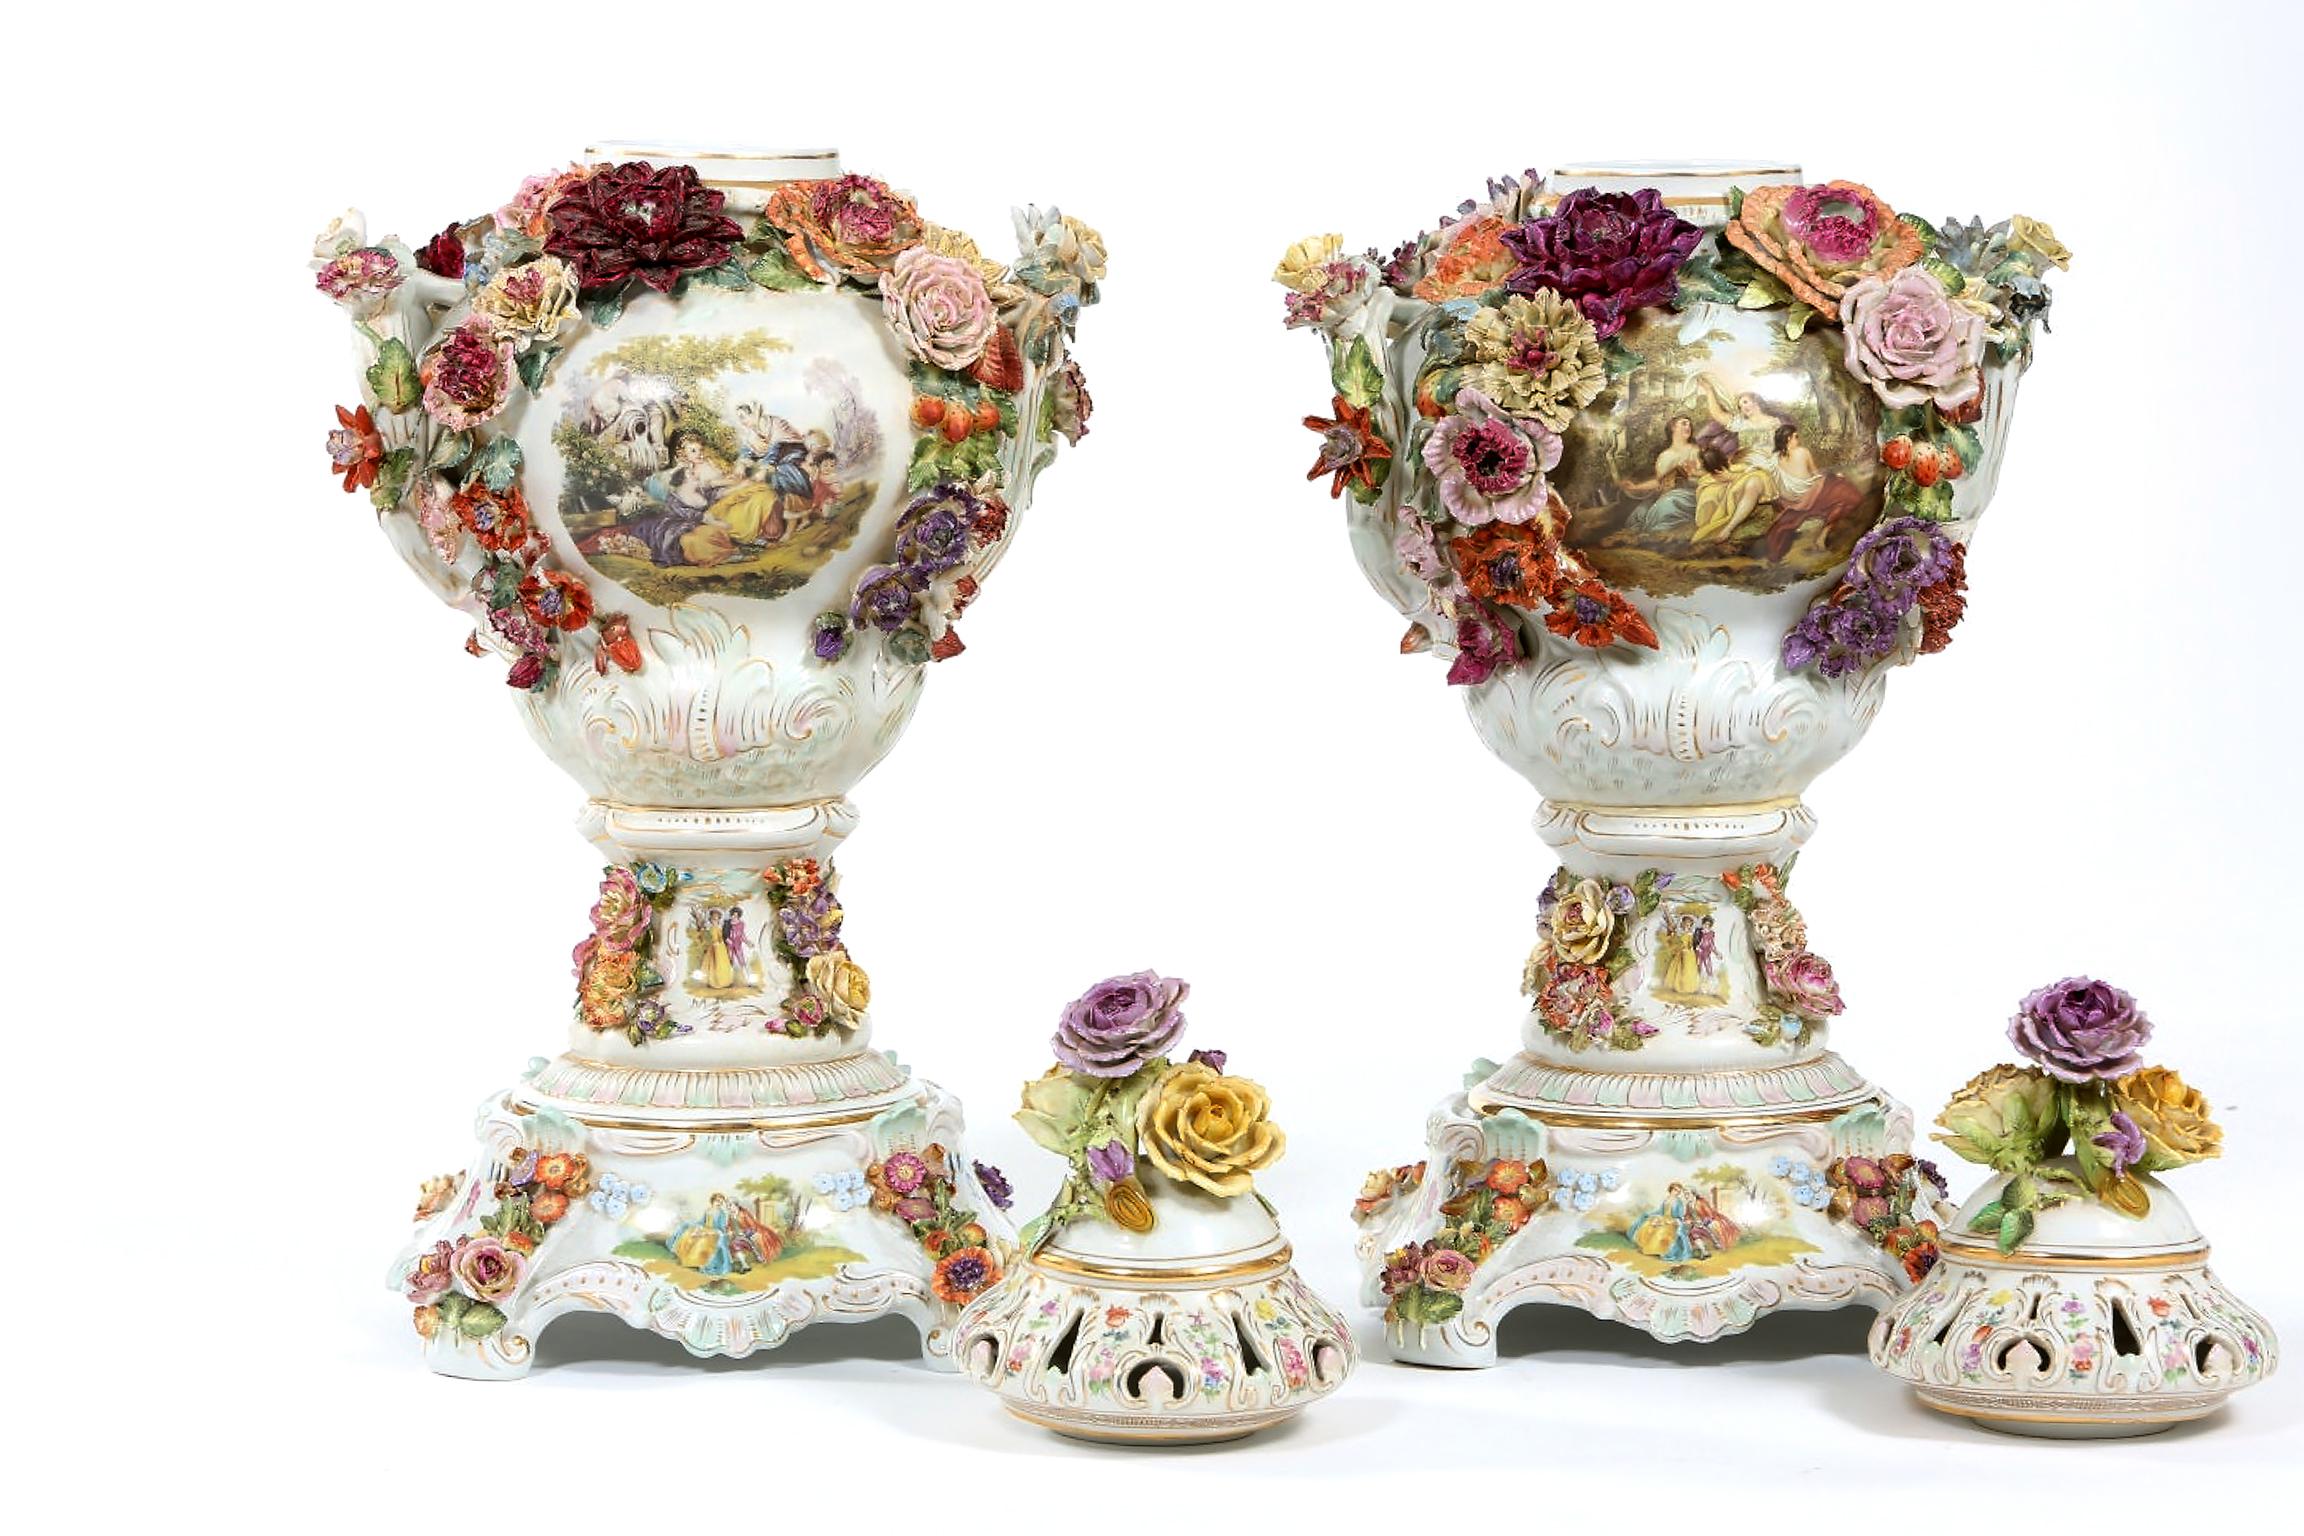 Hand-Painted Impressive Pair German Porcelain Covered Urn / Centerpieces